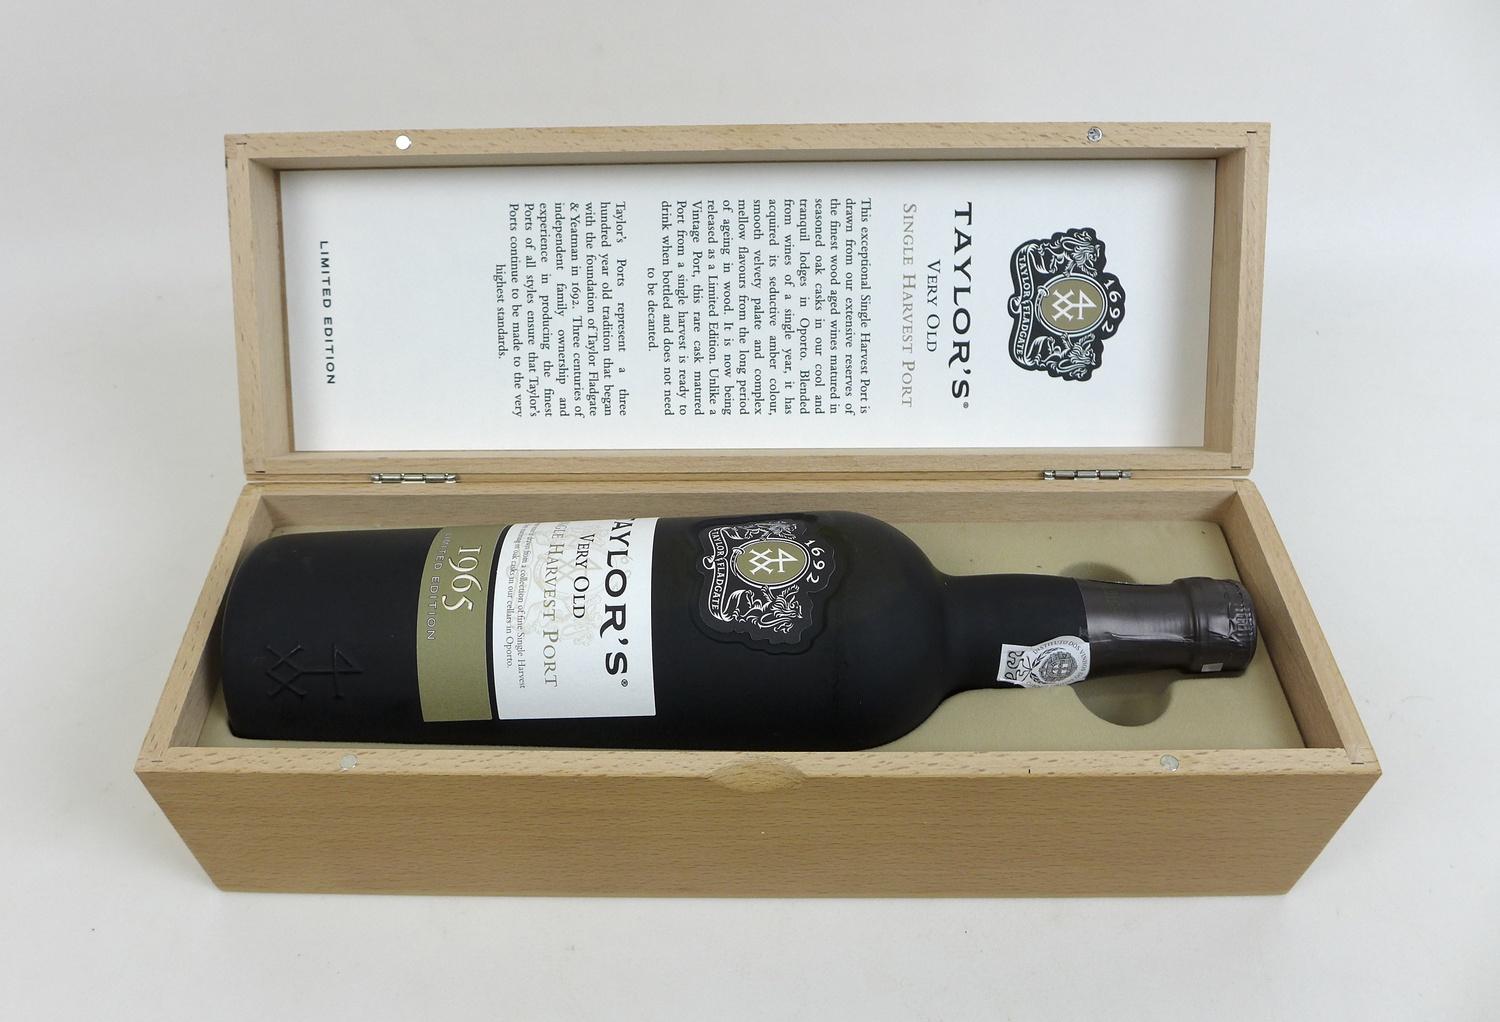 A limited edition bottle of Taylor's 'Very Old Single Harvest 1965' port, with wooden presentation - Image 4 of 5